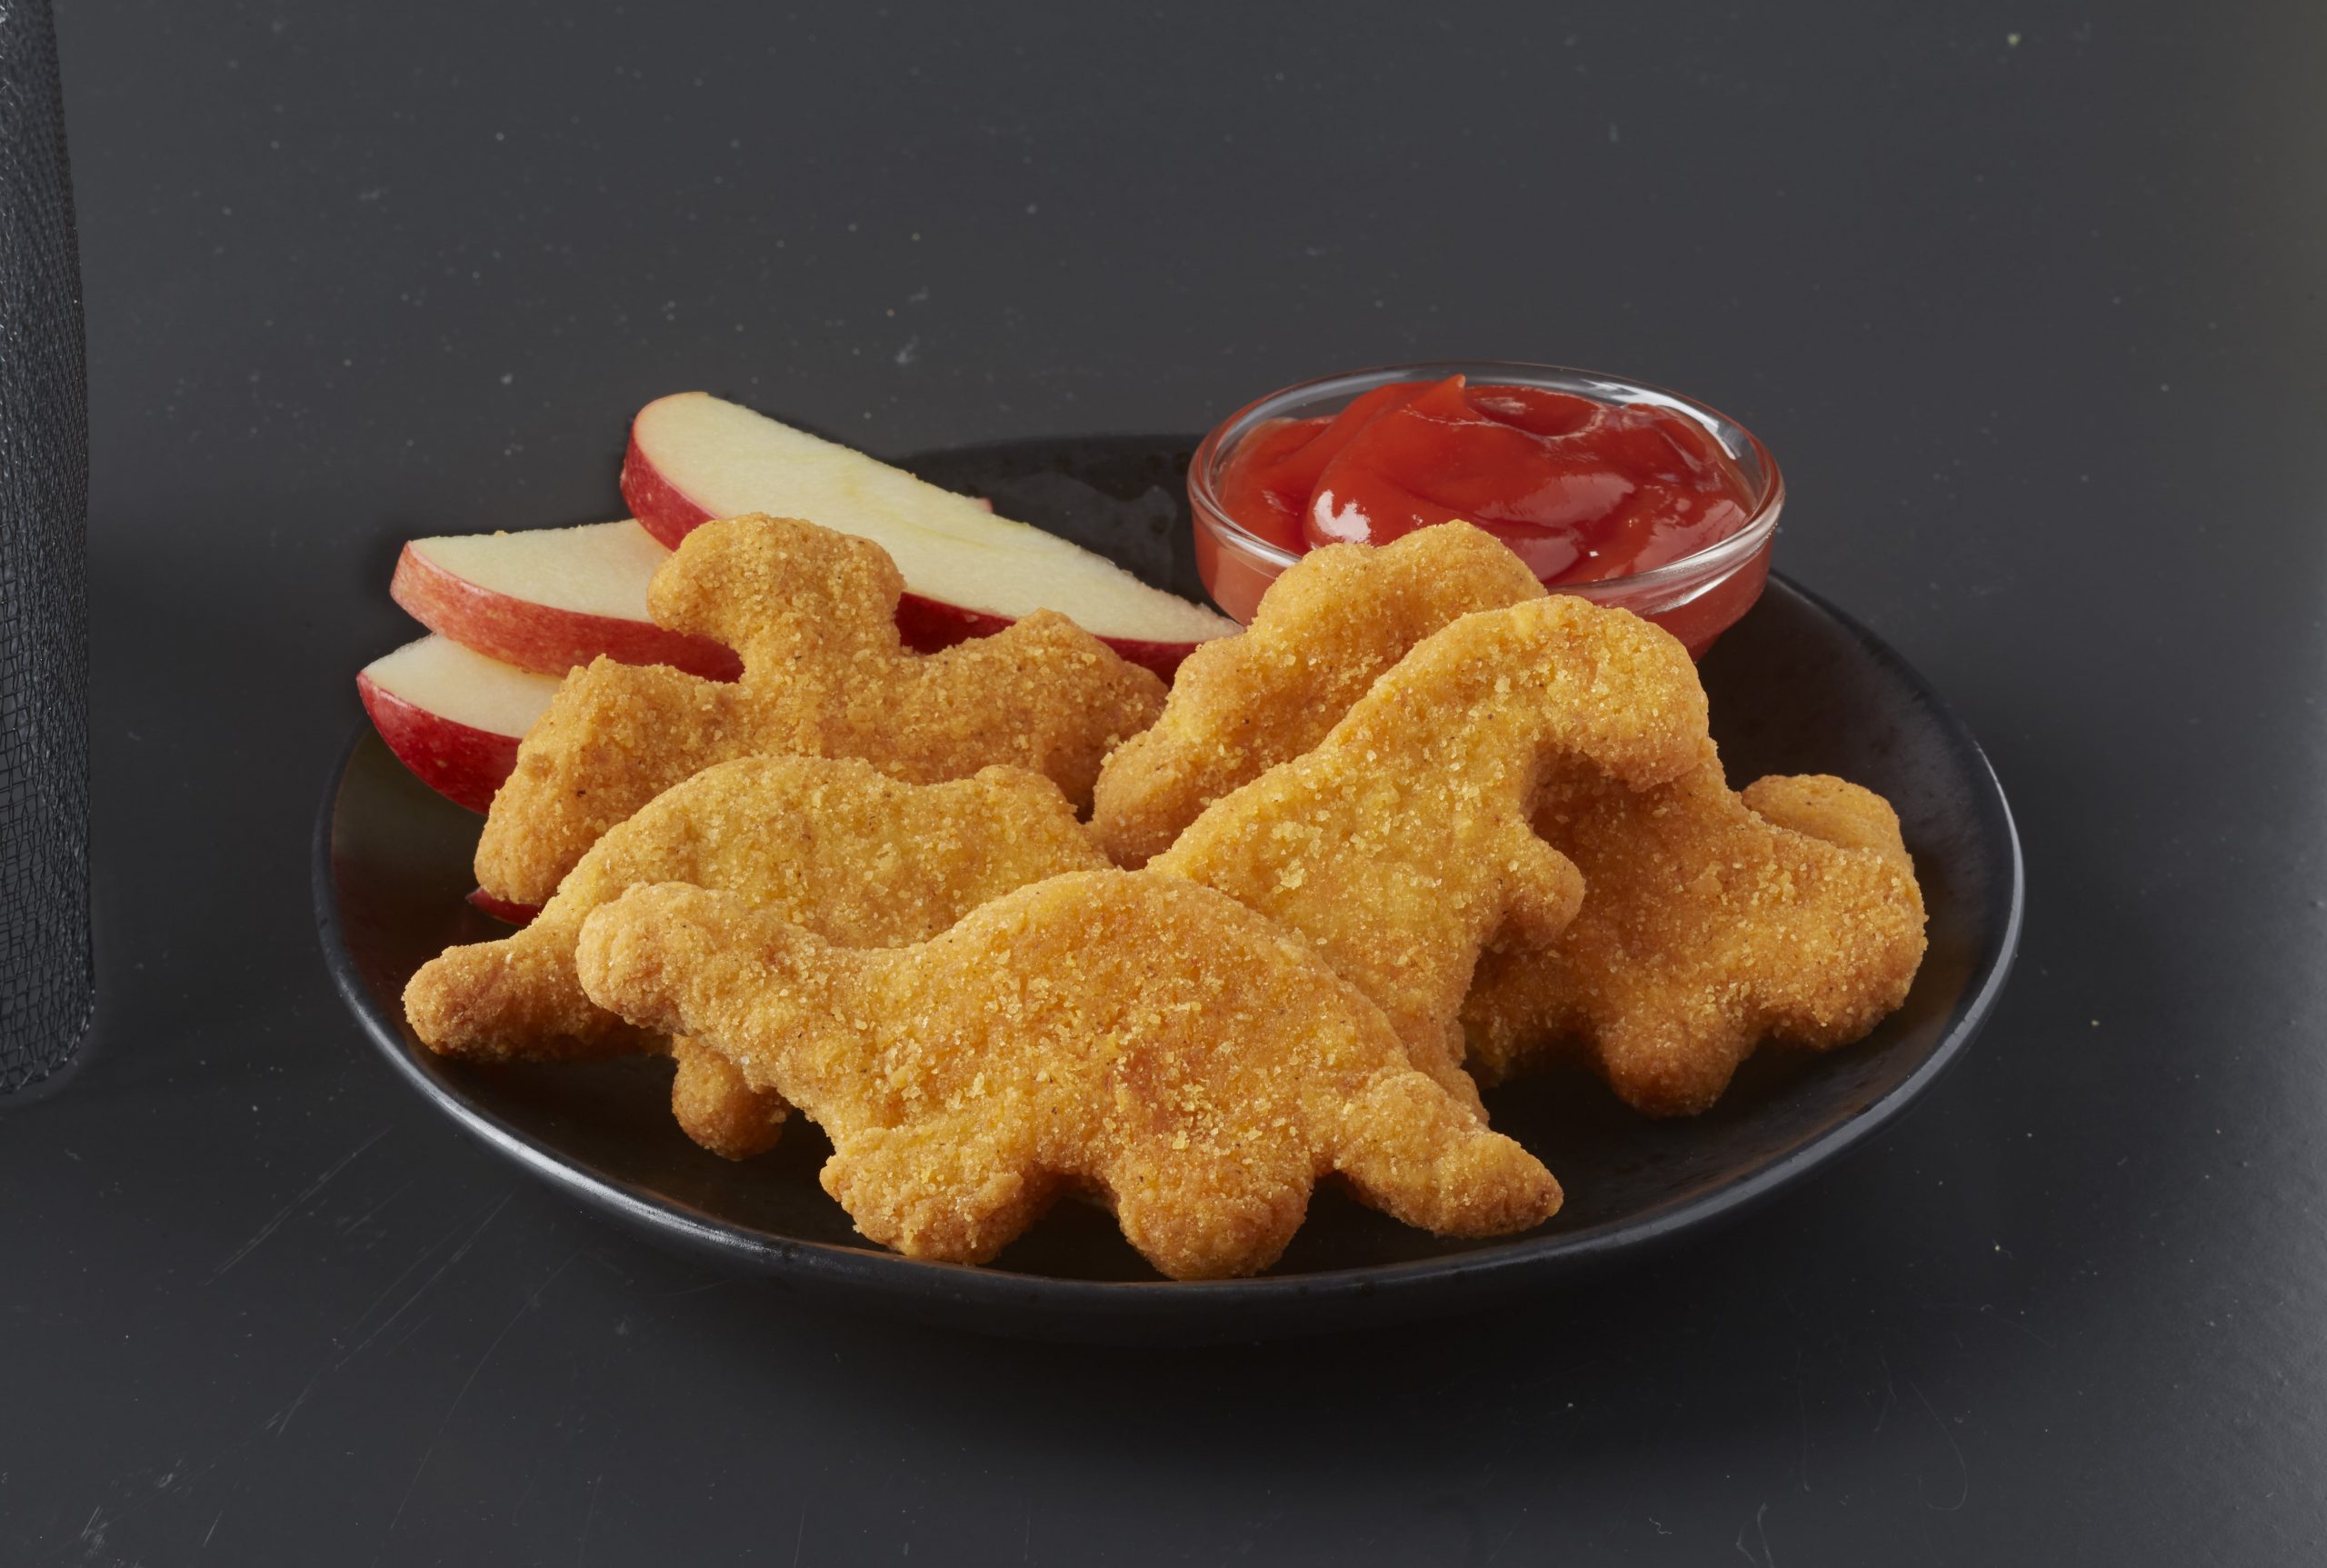 dino nuggets from john soules foods